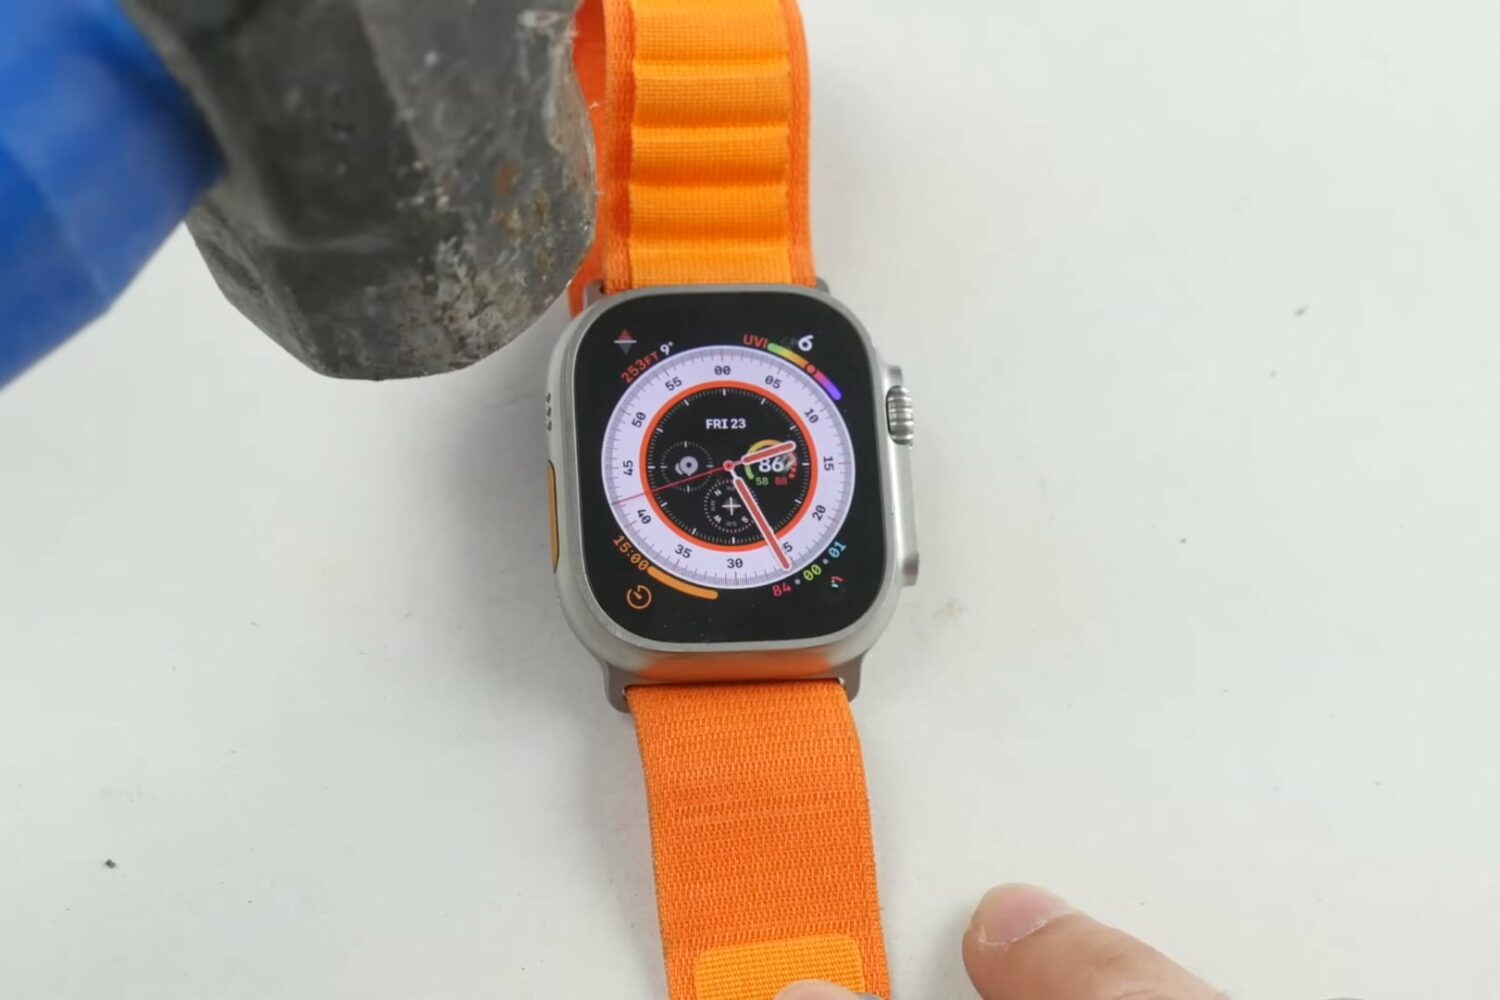 Apple Watch Ultra being hit on the front sapphire cover glass with a heavy hammer